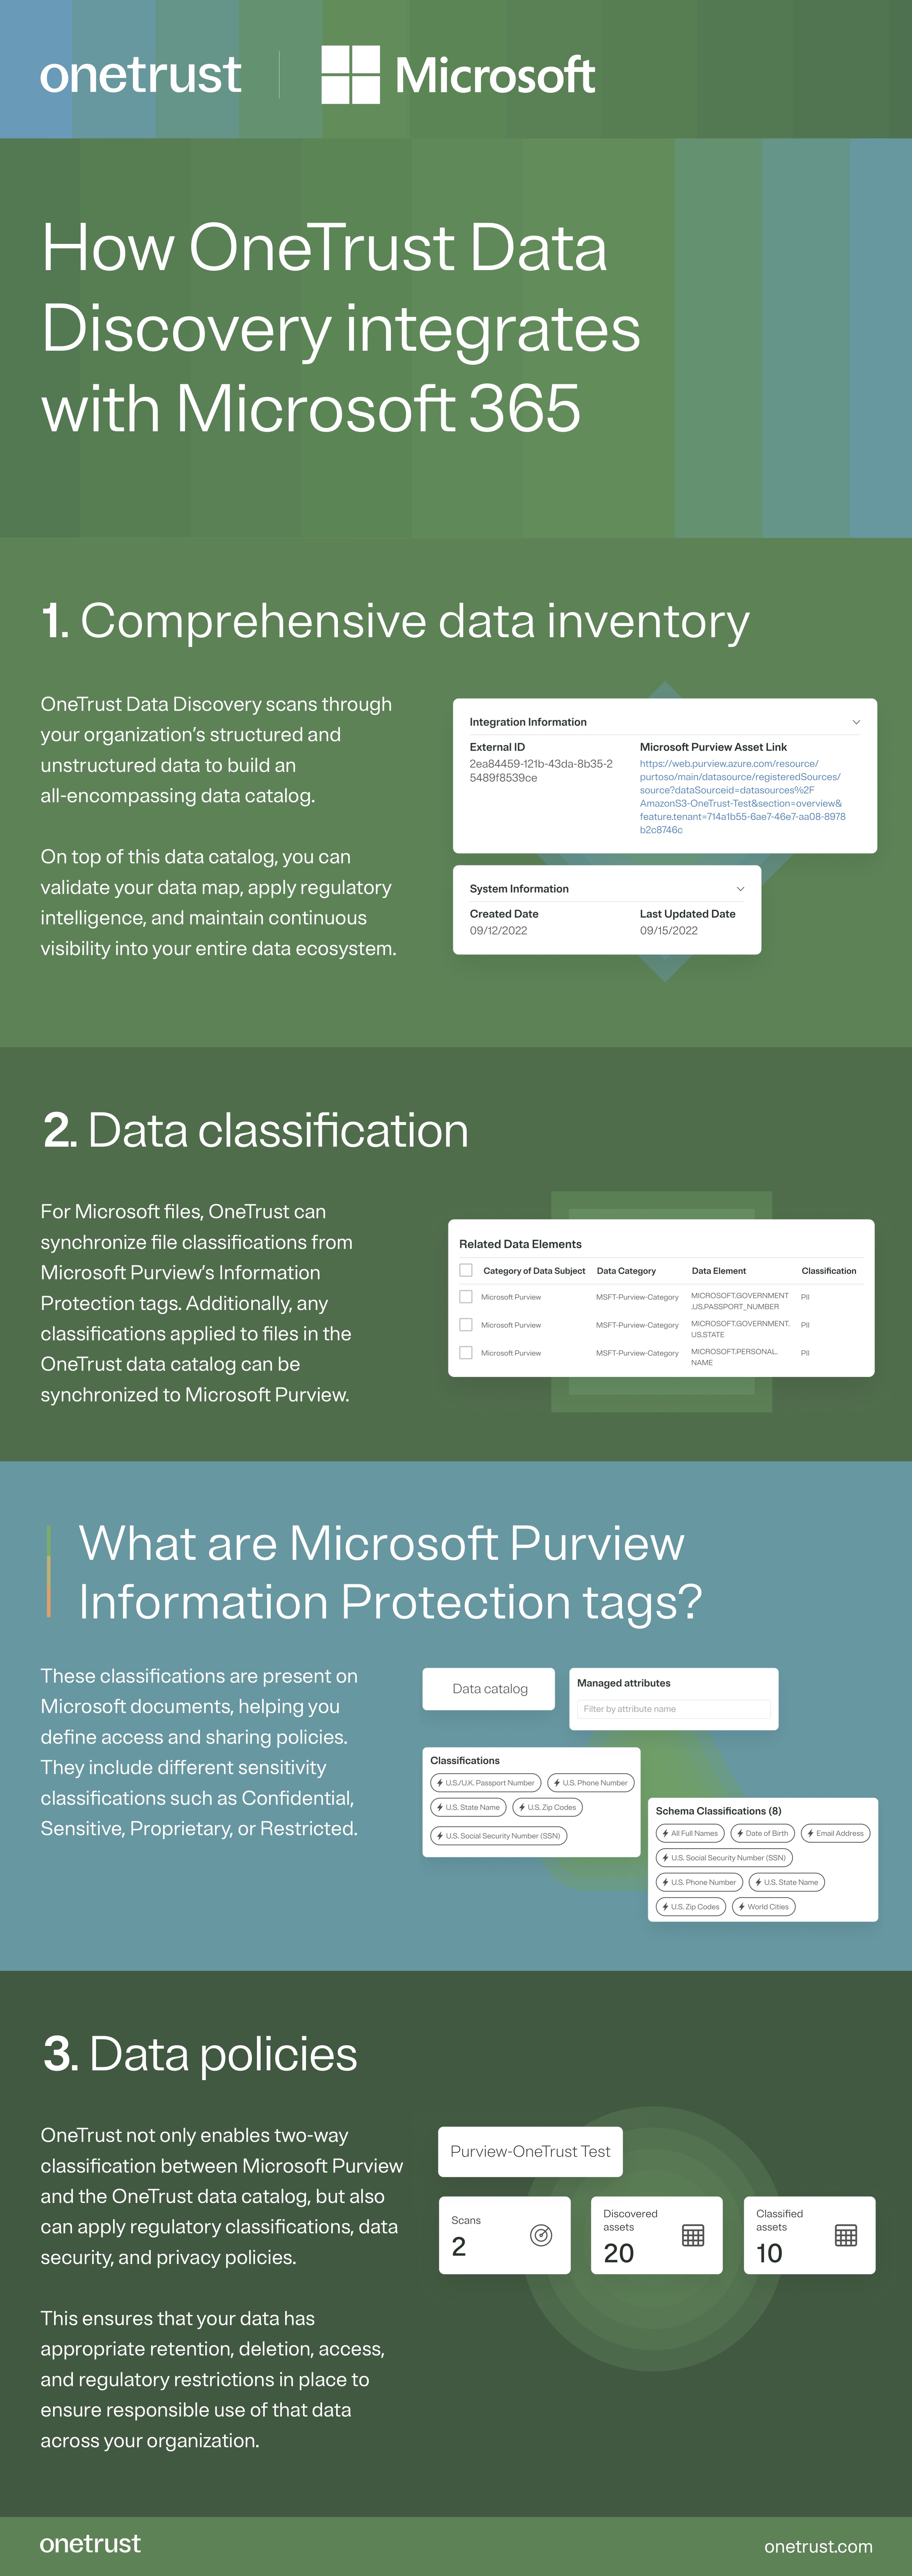 Infographic entitled How OneTrust Data Discovery integrates with Microsoft 365. It has three parts. First, OneTrust Data Discovery comes with Comprehensive data inventory. It scans through your organization’s structured and unstructured data to build	 an all-encompassing data catalog. On top of this data catalog, you can validate your data map, apply regulatory intelligence, and maintain continuous visibility into your entire data ecosystem. The second part is data classification. For Microsoft files, OneTrust can synchronize file classifications from Microsoft Purview’s Information Protection tags. Additionally, any classifications applied to field in the OneTrust data catalog can be synchronized to Microsoft Purview. Before the final portion is a side bar that answers the question, What are Microsoft Purview Information Protection tags? The answer is that these classifications are present on Microsoft documents, helping you define access and sharing policies. They include different sensitivity classifications such as Confidential, Sensitive, Proprietary, or Restricted. Finally, the infographic goes into how OneTrust Data Discovery helps with data polices. Not only does it enable two-way classification between Microsoft Purview and the OneTrust data catalog, but also can apply regulatory classifications, data security, and privacy policies. This ensures that your data has appropriate retention, deletion, access, and regulatory restrictions in place to ensure responsible use of that data across your organization.